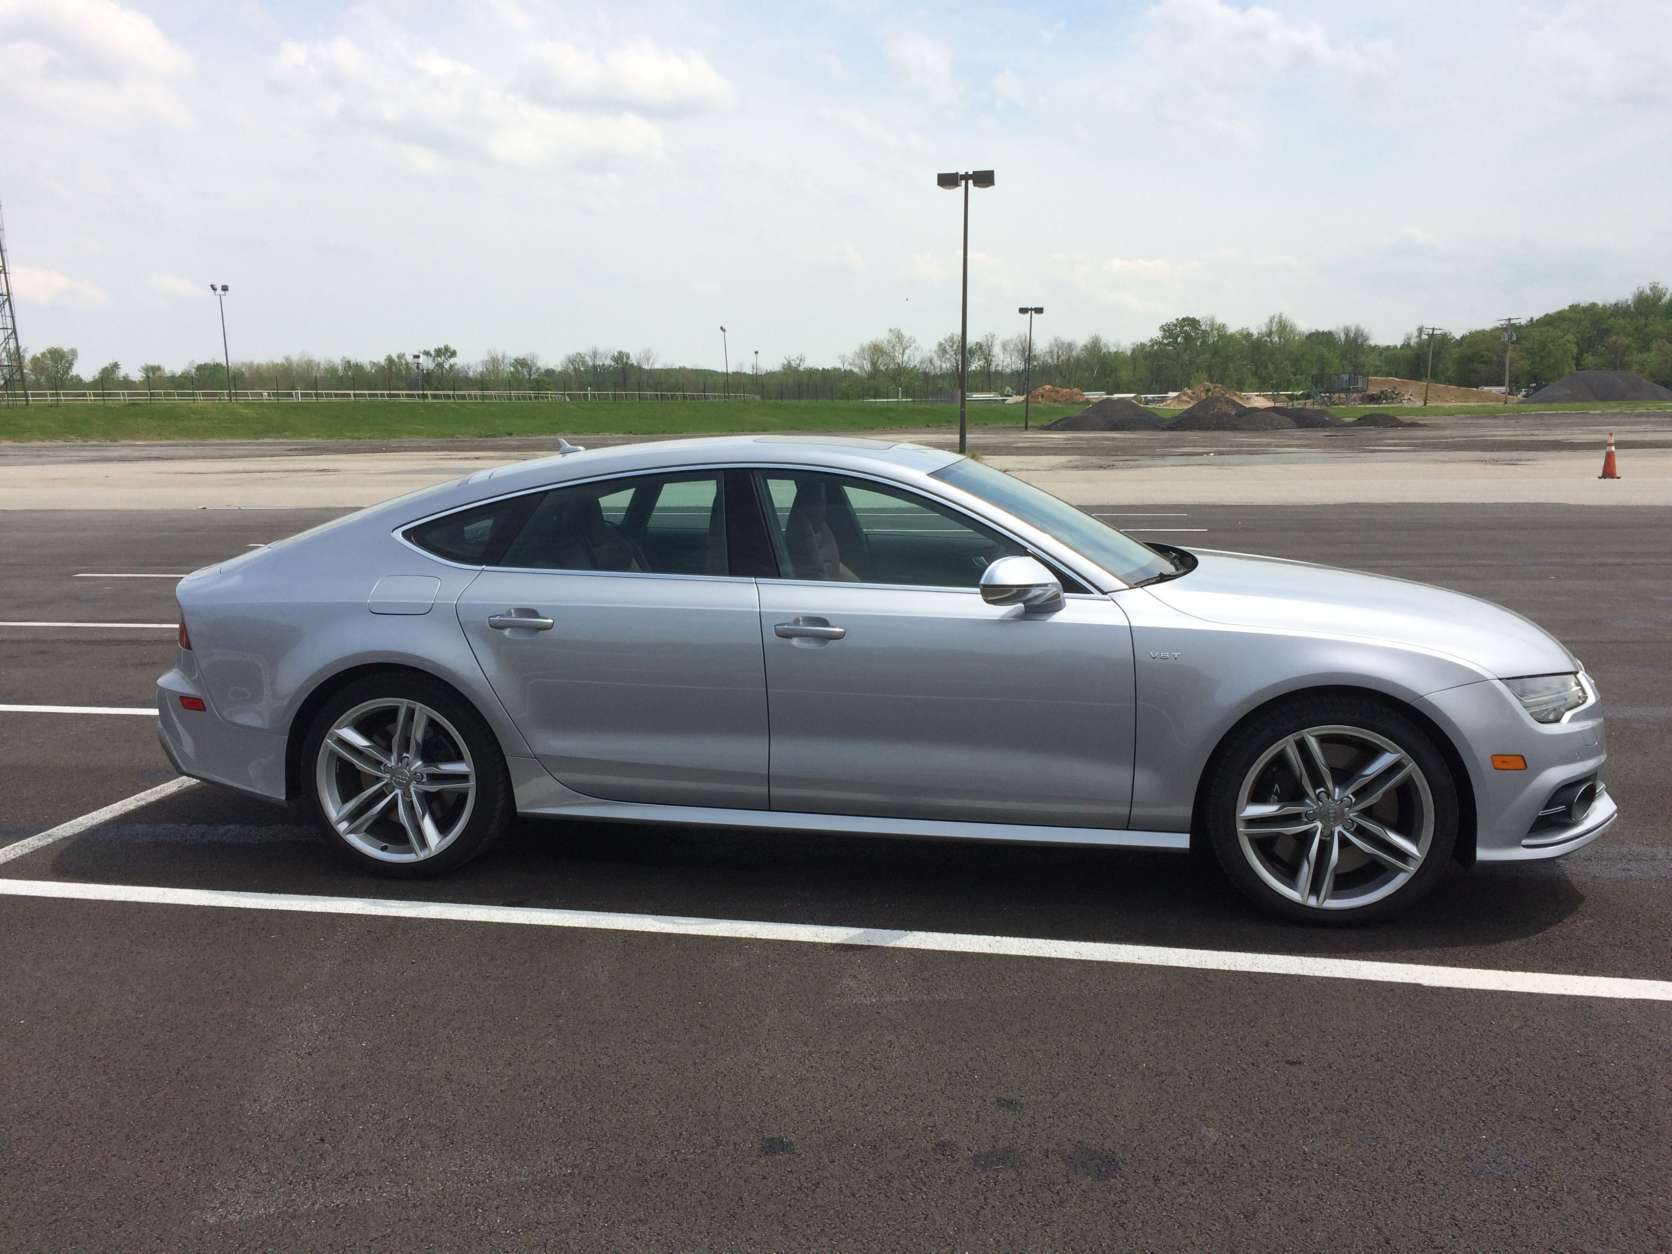 This week Parris tested the $91,000 Audi S7, which comes with a 450 horsepower turbo V-8. He said Audi also has an RS7 Performance version that comes with 605 horsepower. (WTOP/Mike Parris) 